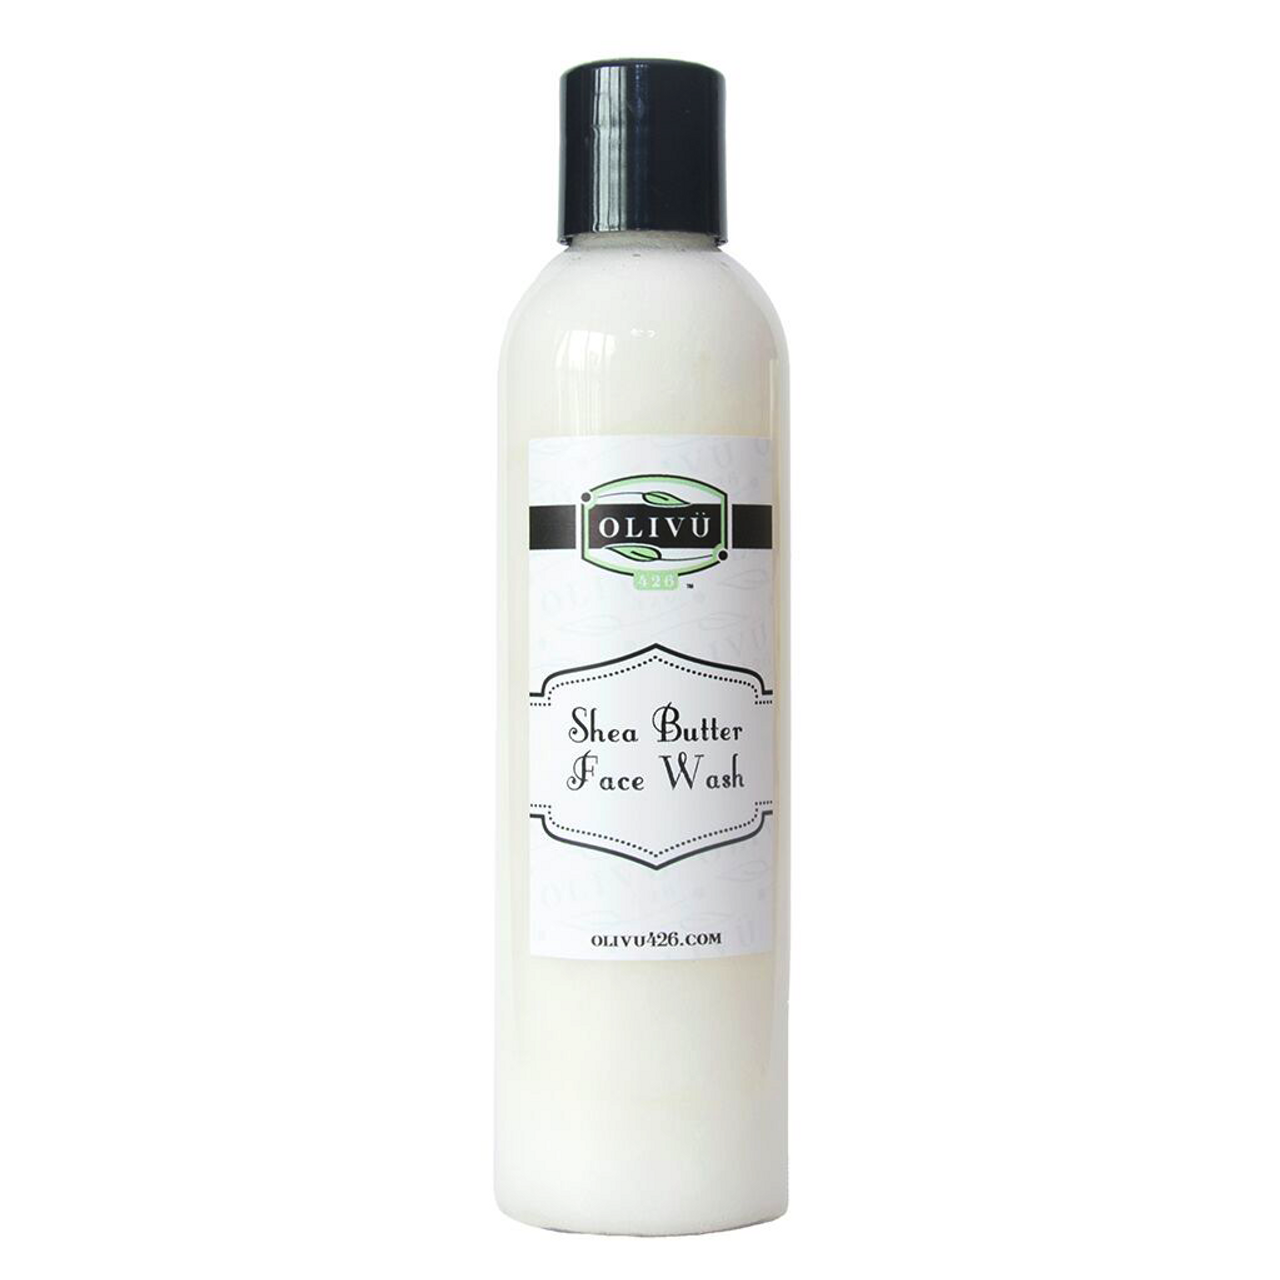 Whipped Olive Leaf Shea Butter Facial Moisturizer